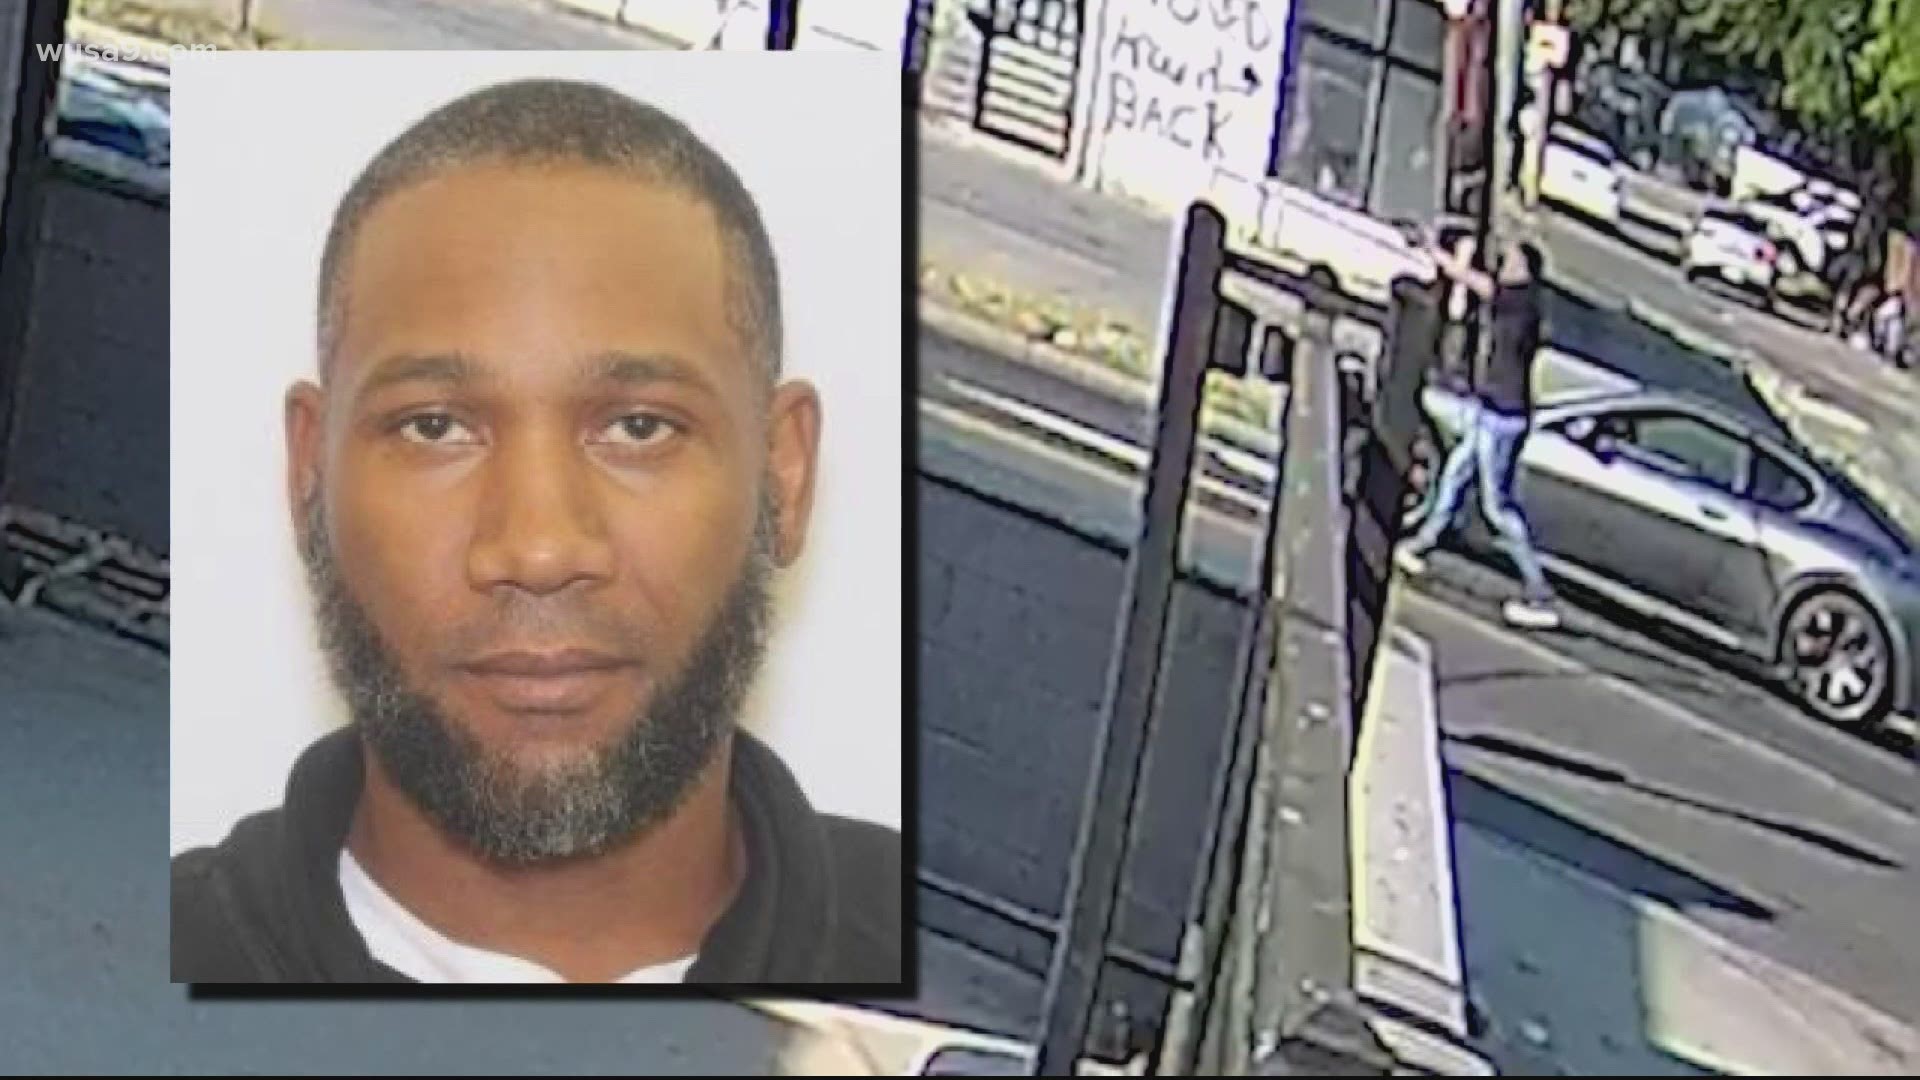 Kenneth Miles Davis, Jr., 42, of Lanham, Maryland is the suspect wanted by police after they say he was seen in a video shooting at a woman and her child.